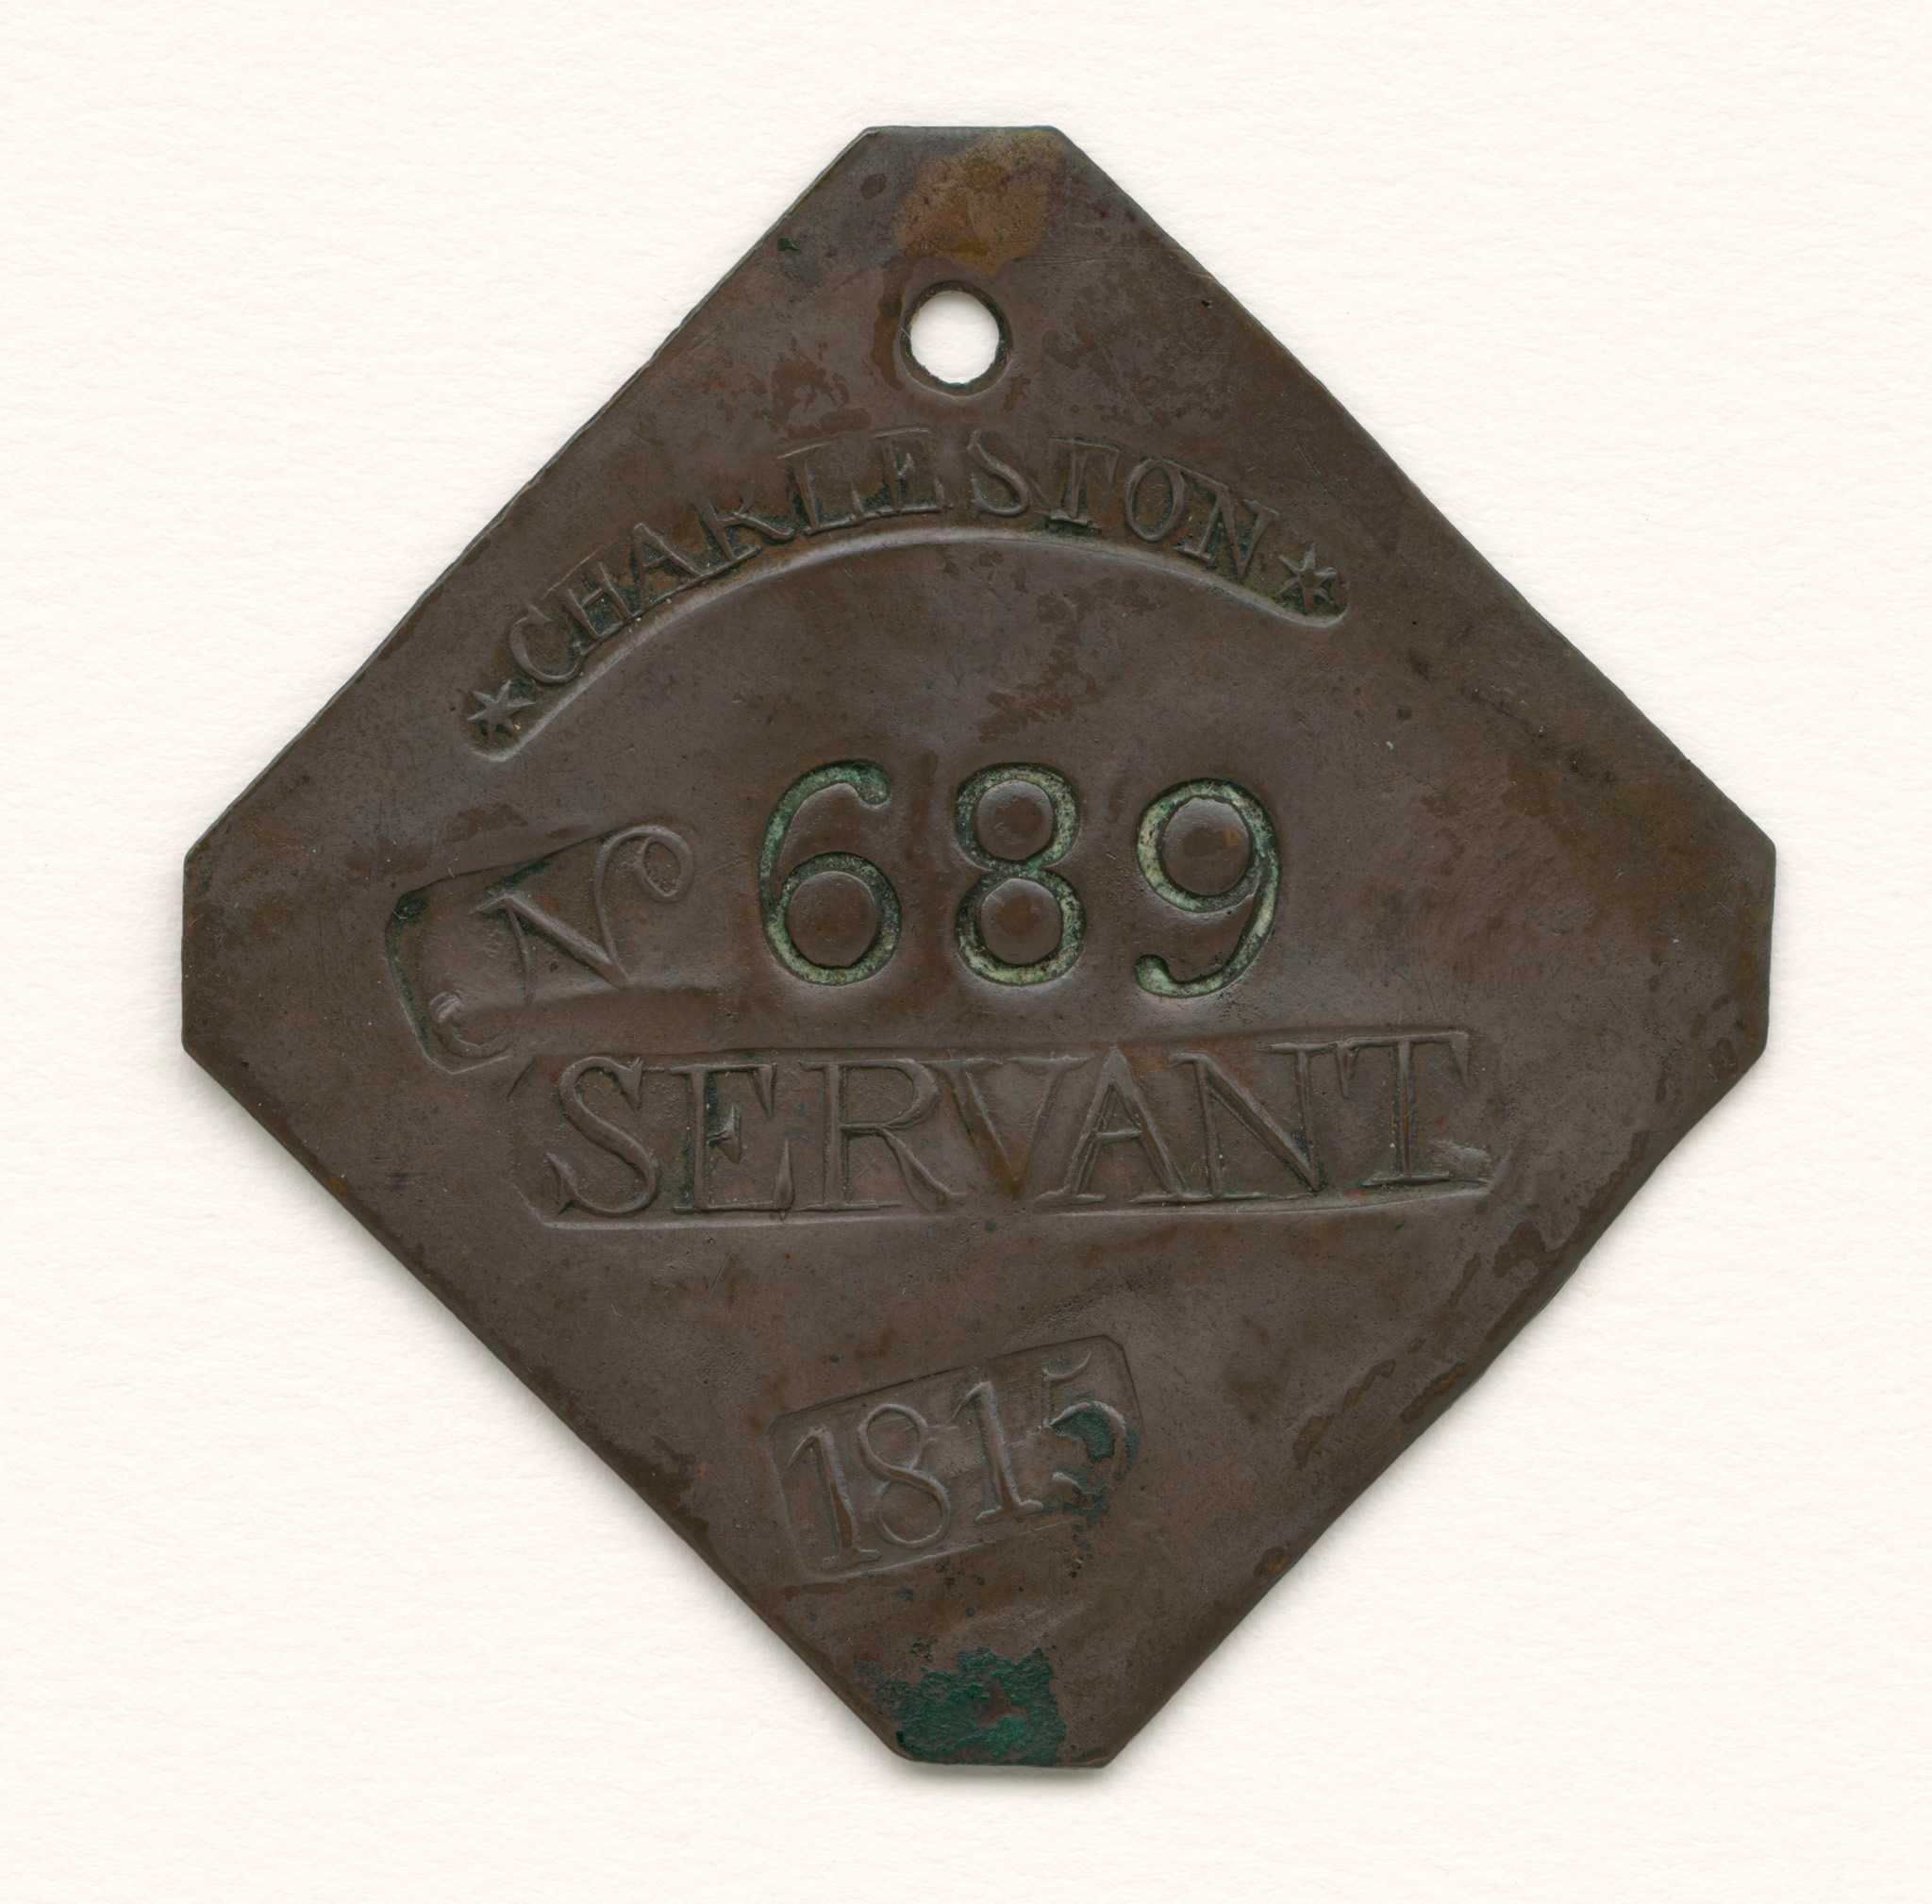 A flat diamond-shaped tag with clipped corners and a hole at the top for suspension. “LAFAR” hallmark punched on the back. The elements on the front are as follows (top to bottom): "*CHARLESTON*" in a lunate bar punch; "No" in a square punch followed by an incuse "689" in deep individual punches; "SERVANT" in a rectangular punch; and "1815" bar punched at somewhat of an angle. The condition on this tag is extremely fine with well-defined elements, smooth surfaces, and an even medium brown patina. There is just a bit of verdigris at the bottom.